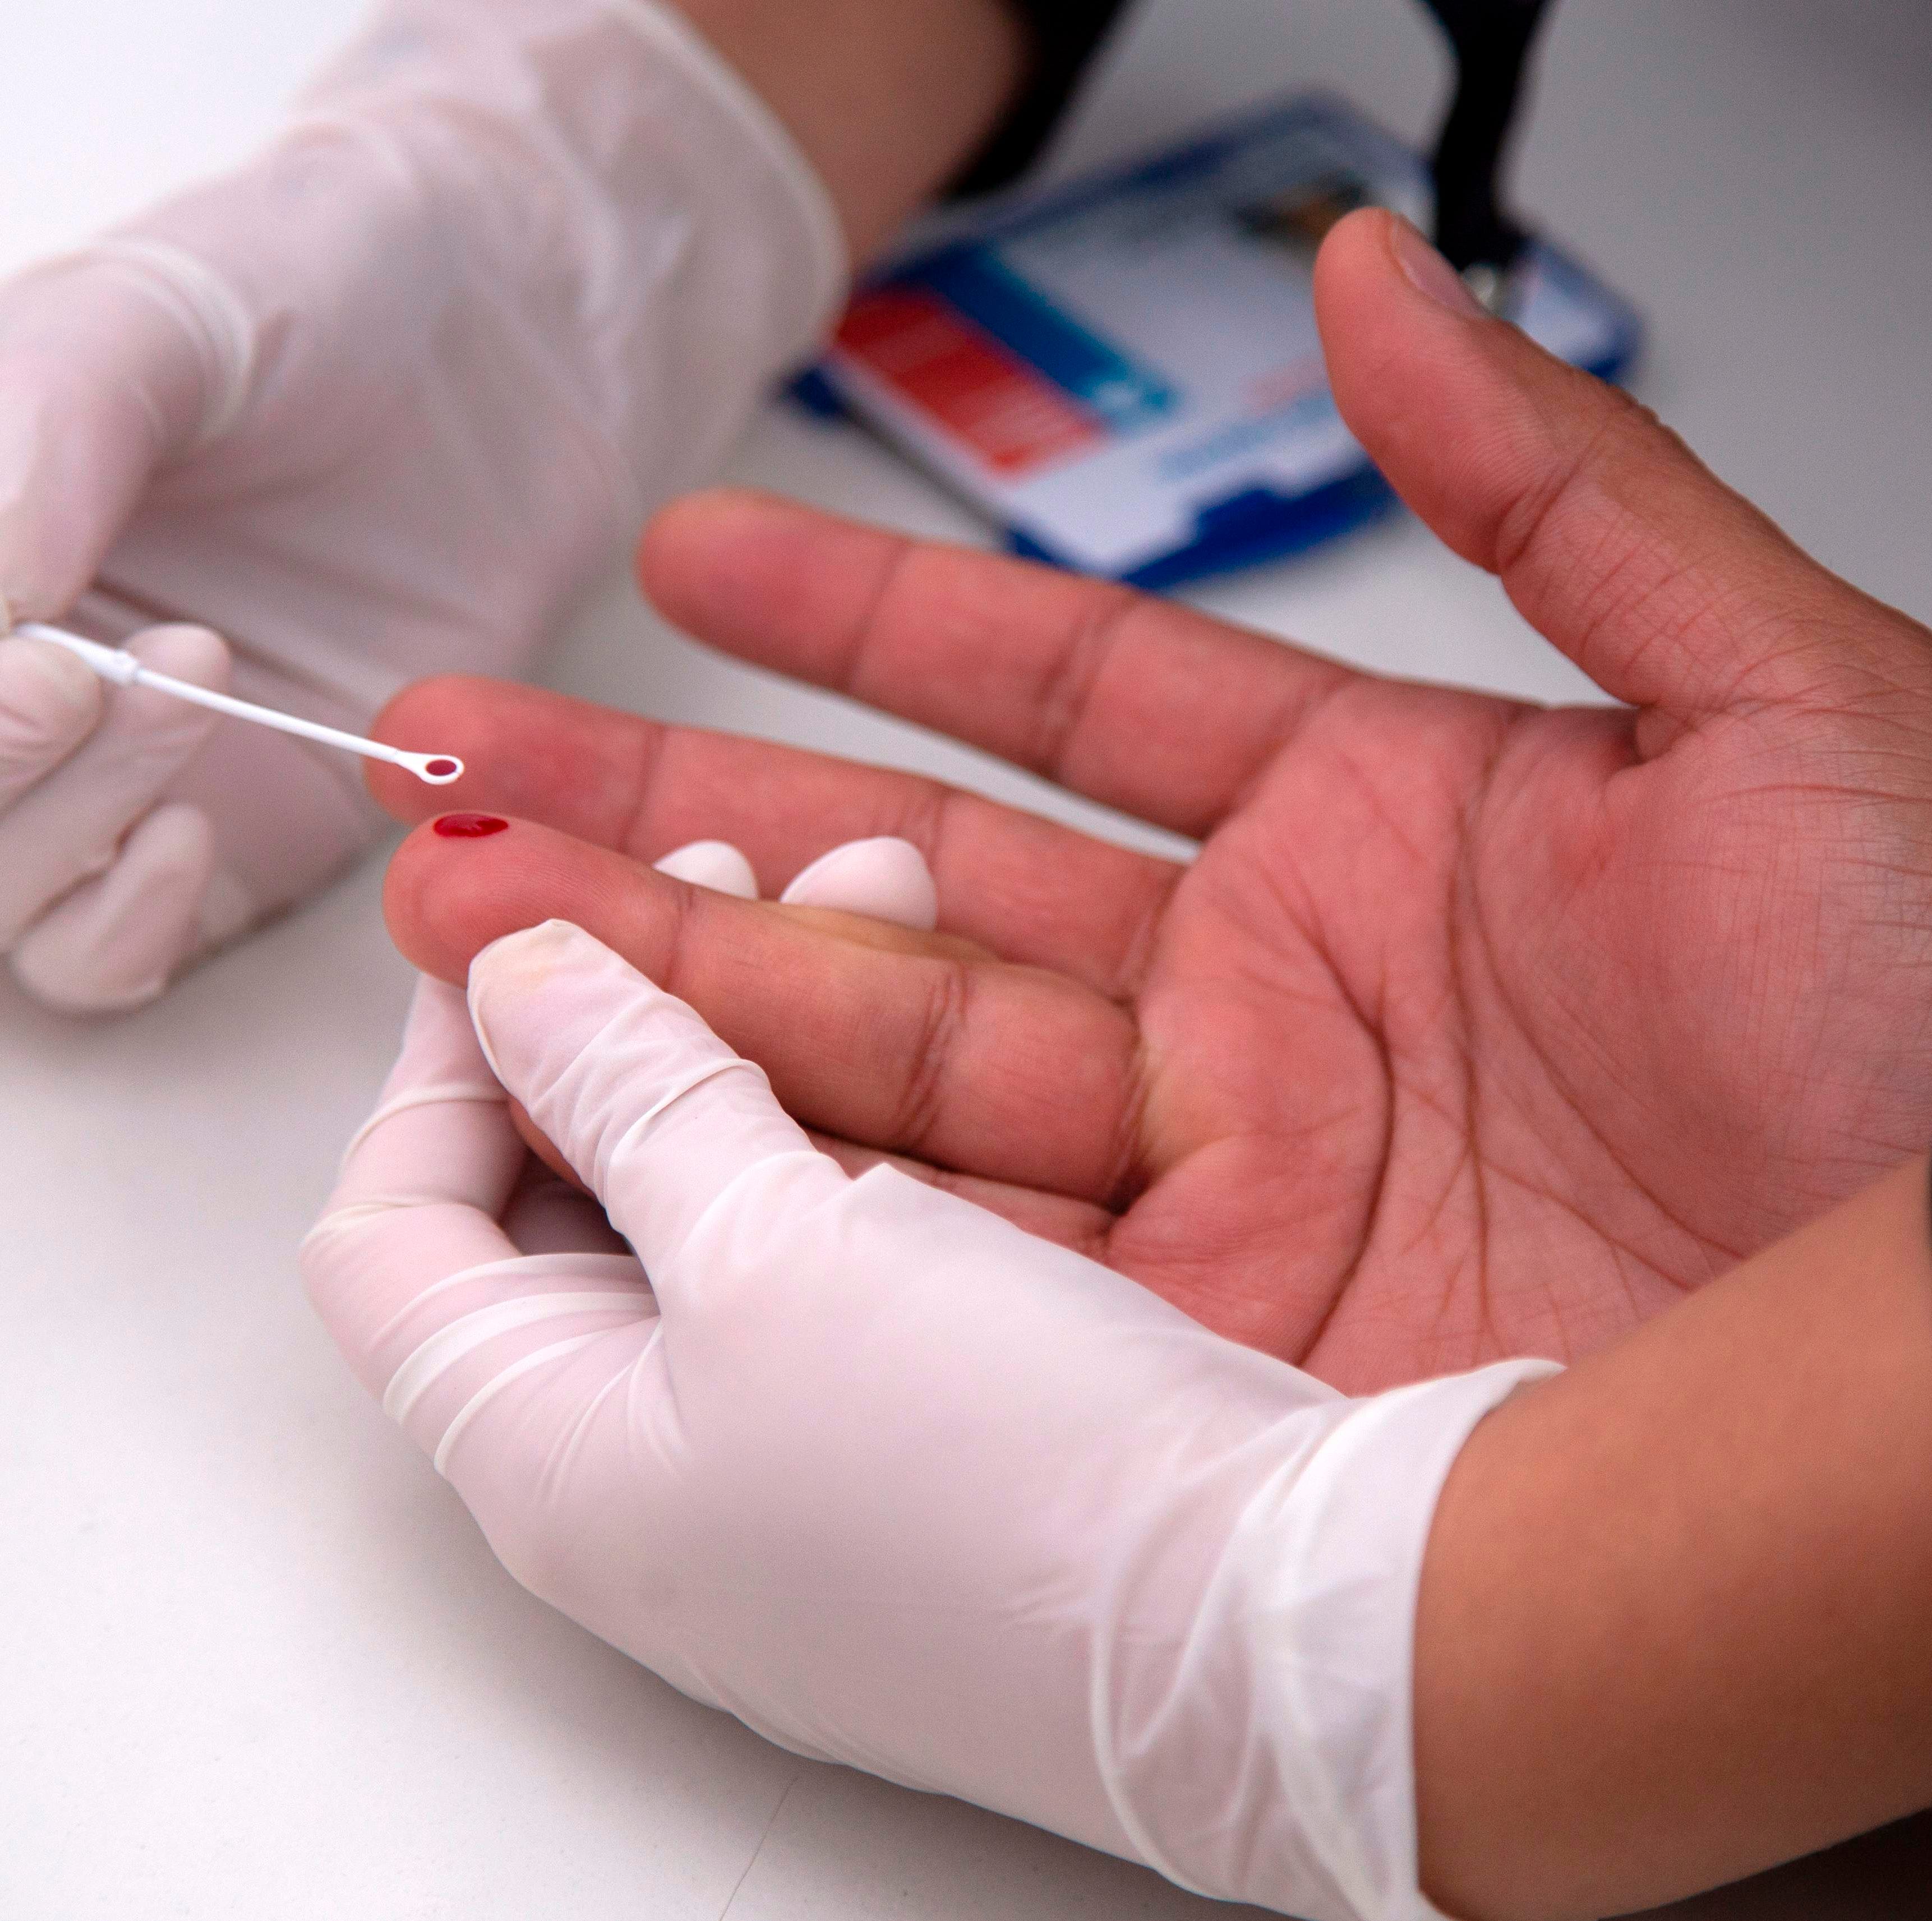 A man undergoes a rapid HIV test on June 23, 2018.